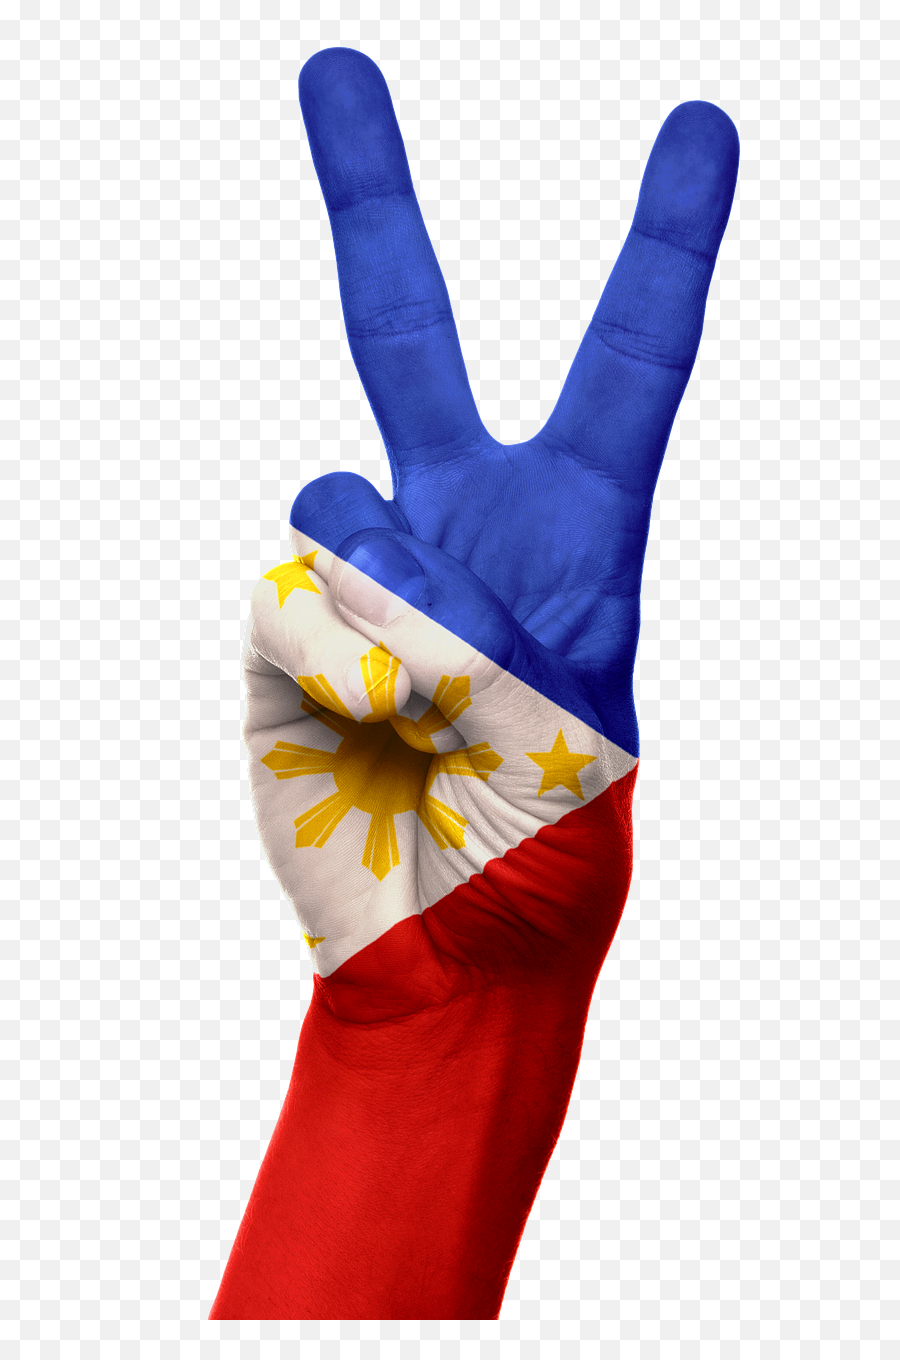 Philippines Flag Hand - Free Image On Pixabay Philippine Independence Day Background Png,Peace Hand Sign Png